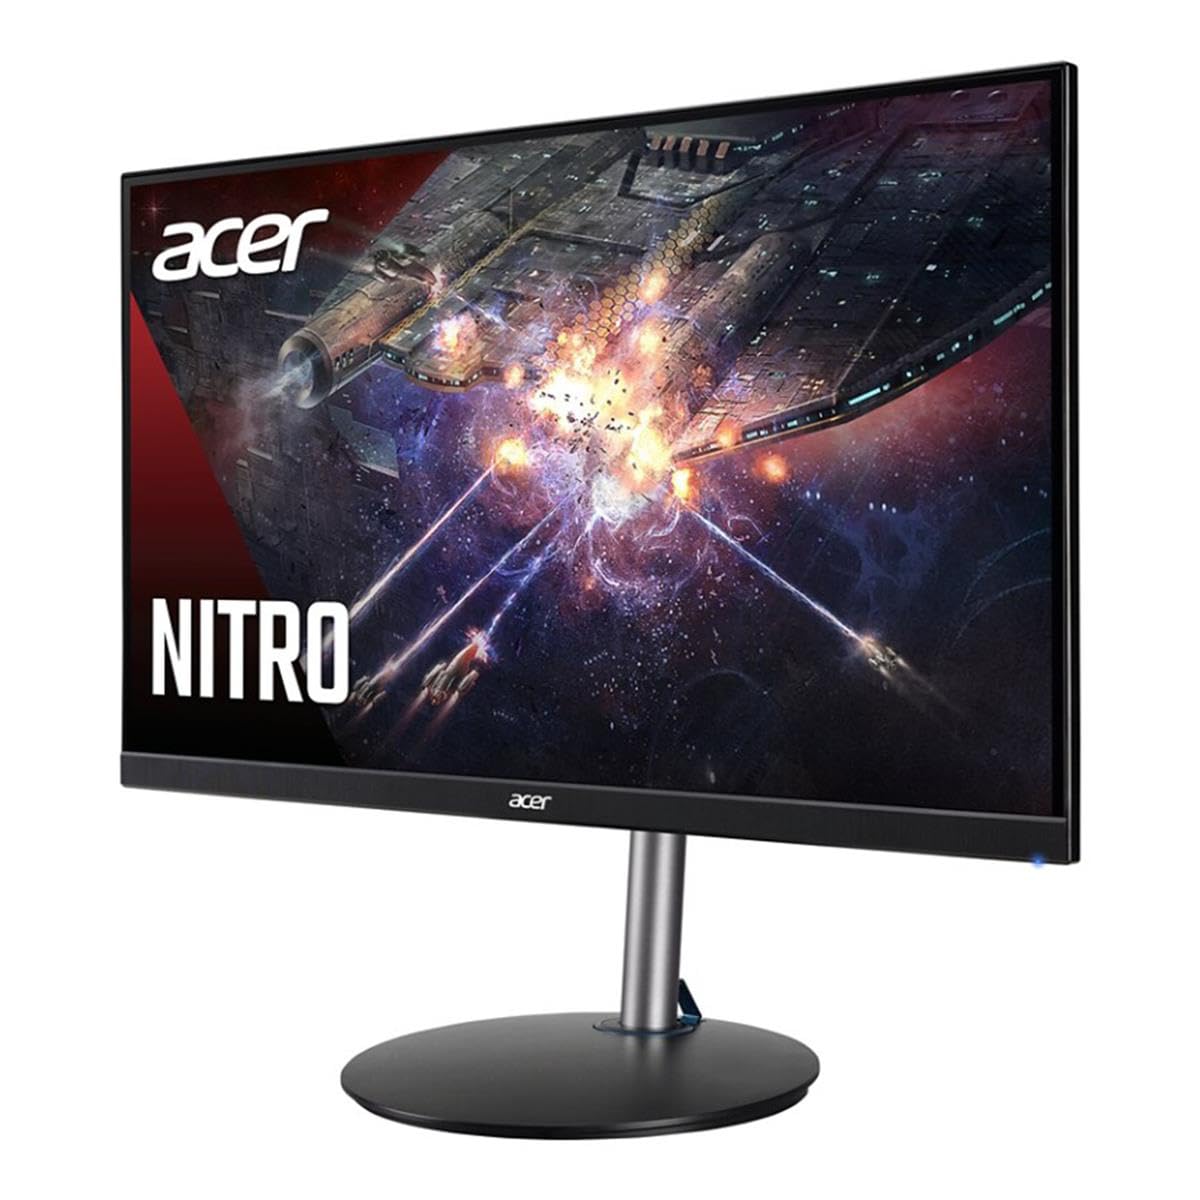 Acer Nitro XF3 XF273 S 27" 16:9 Full HD 144Hz Widescreen IPS LED LCD HDR Gaming Monitor, Black